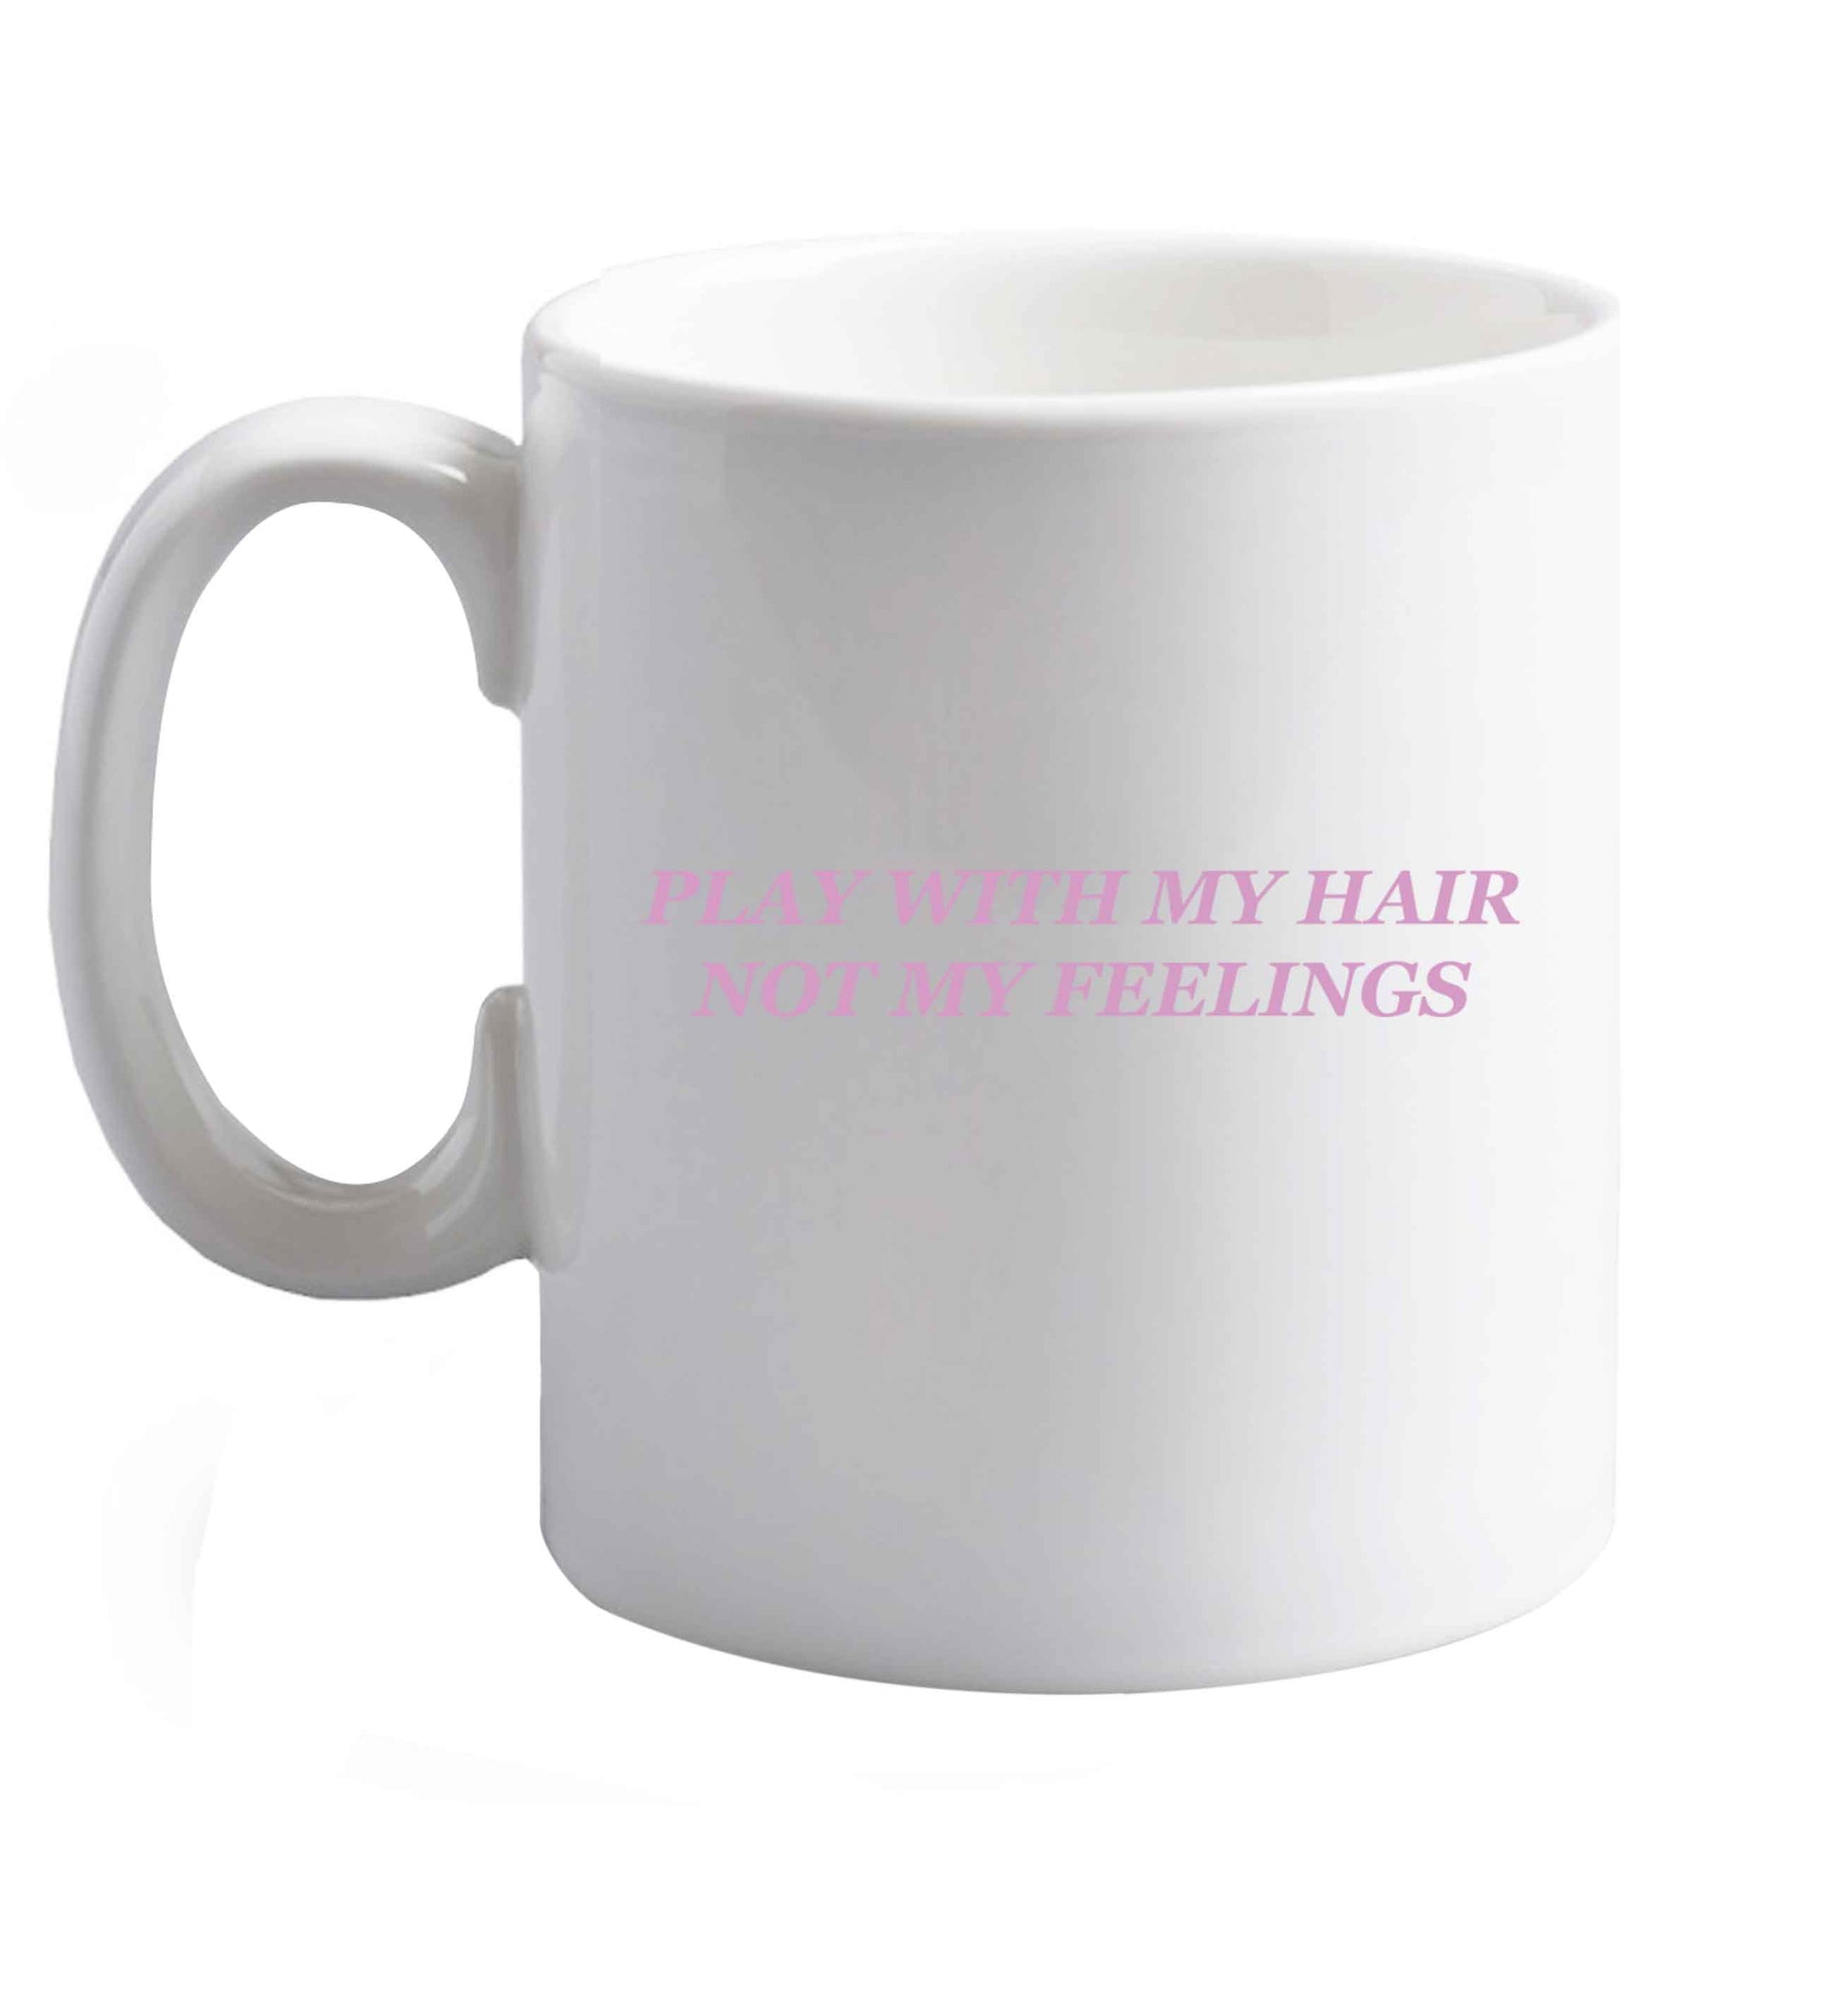 10 oz Play with my hair not my feelings  ceramic mug right handed